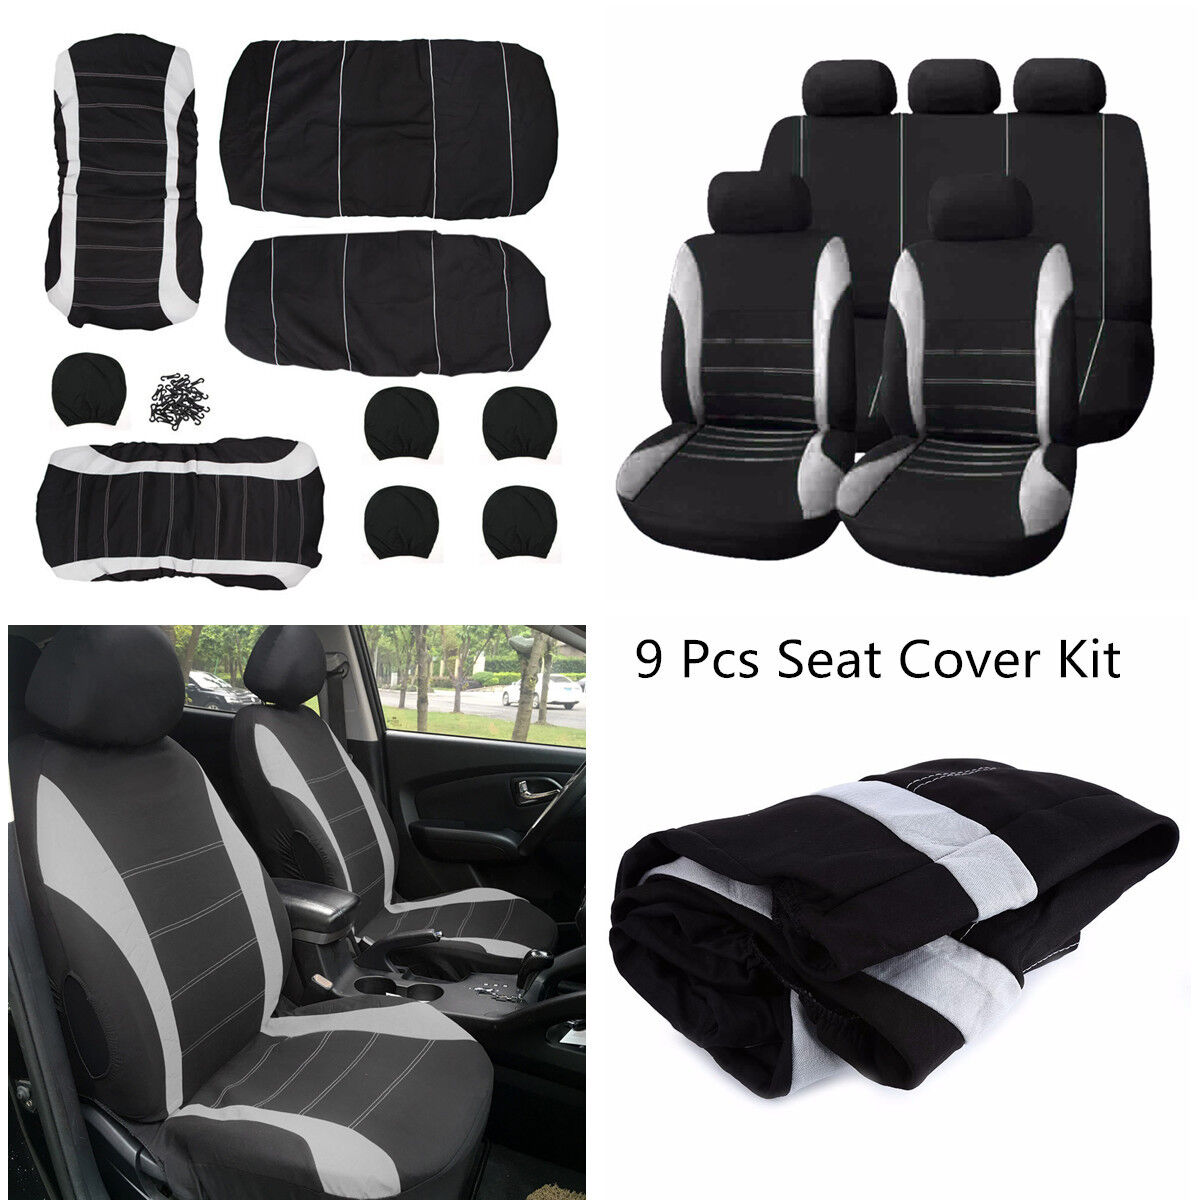 Car Seat Covers Universal For 5-Seats Seat Cover Gray & Black Polyester 9pcs Kit